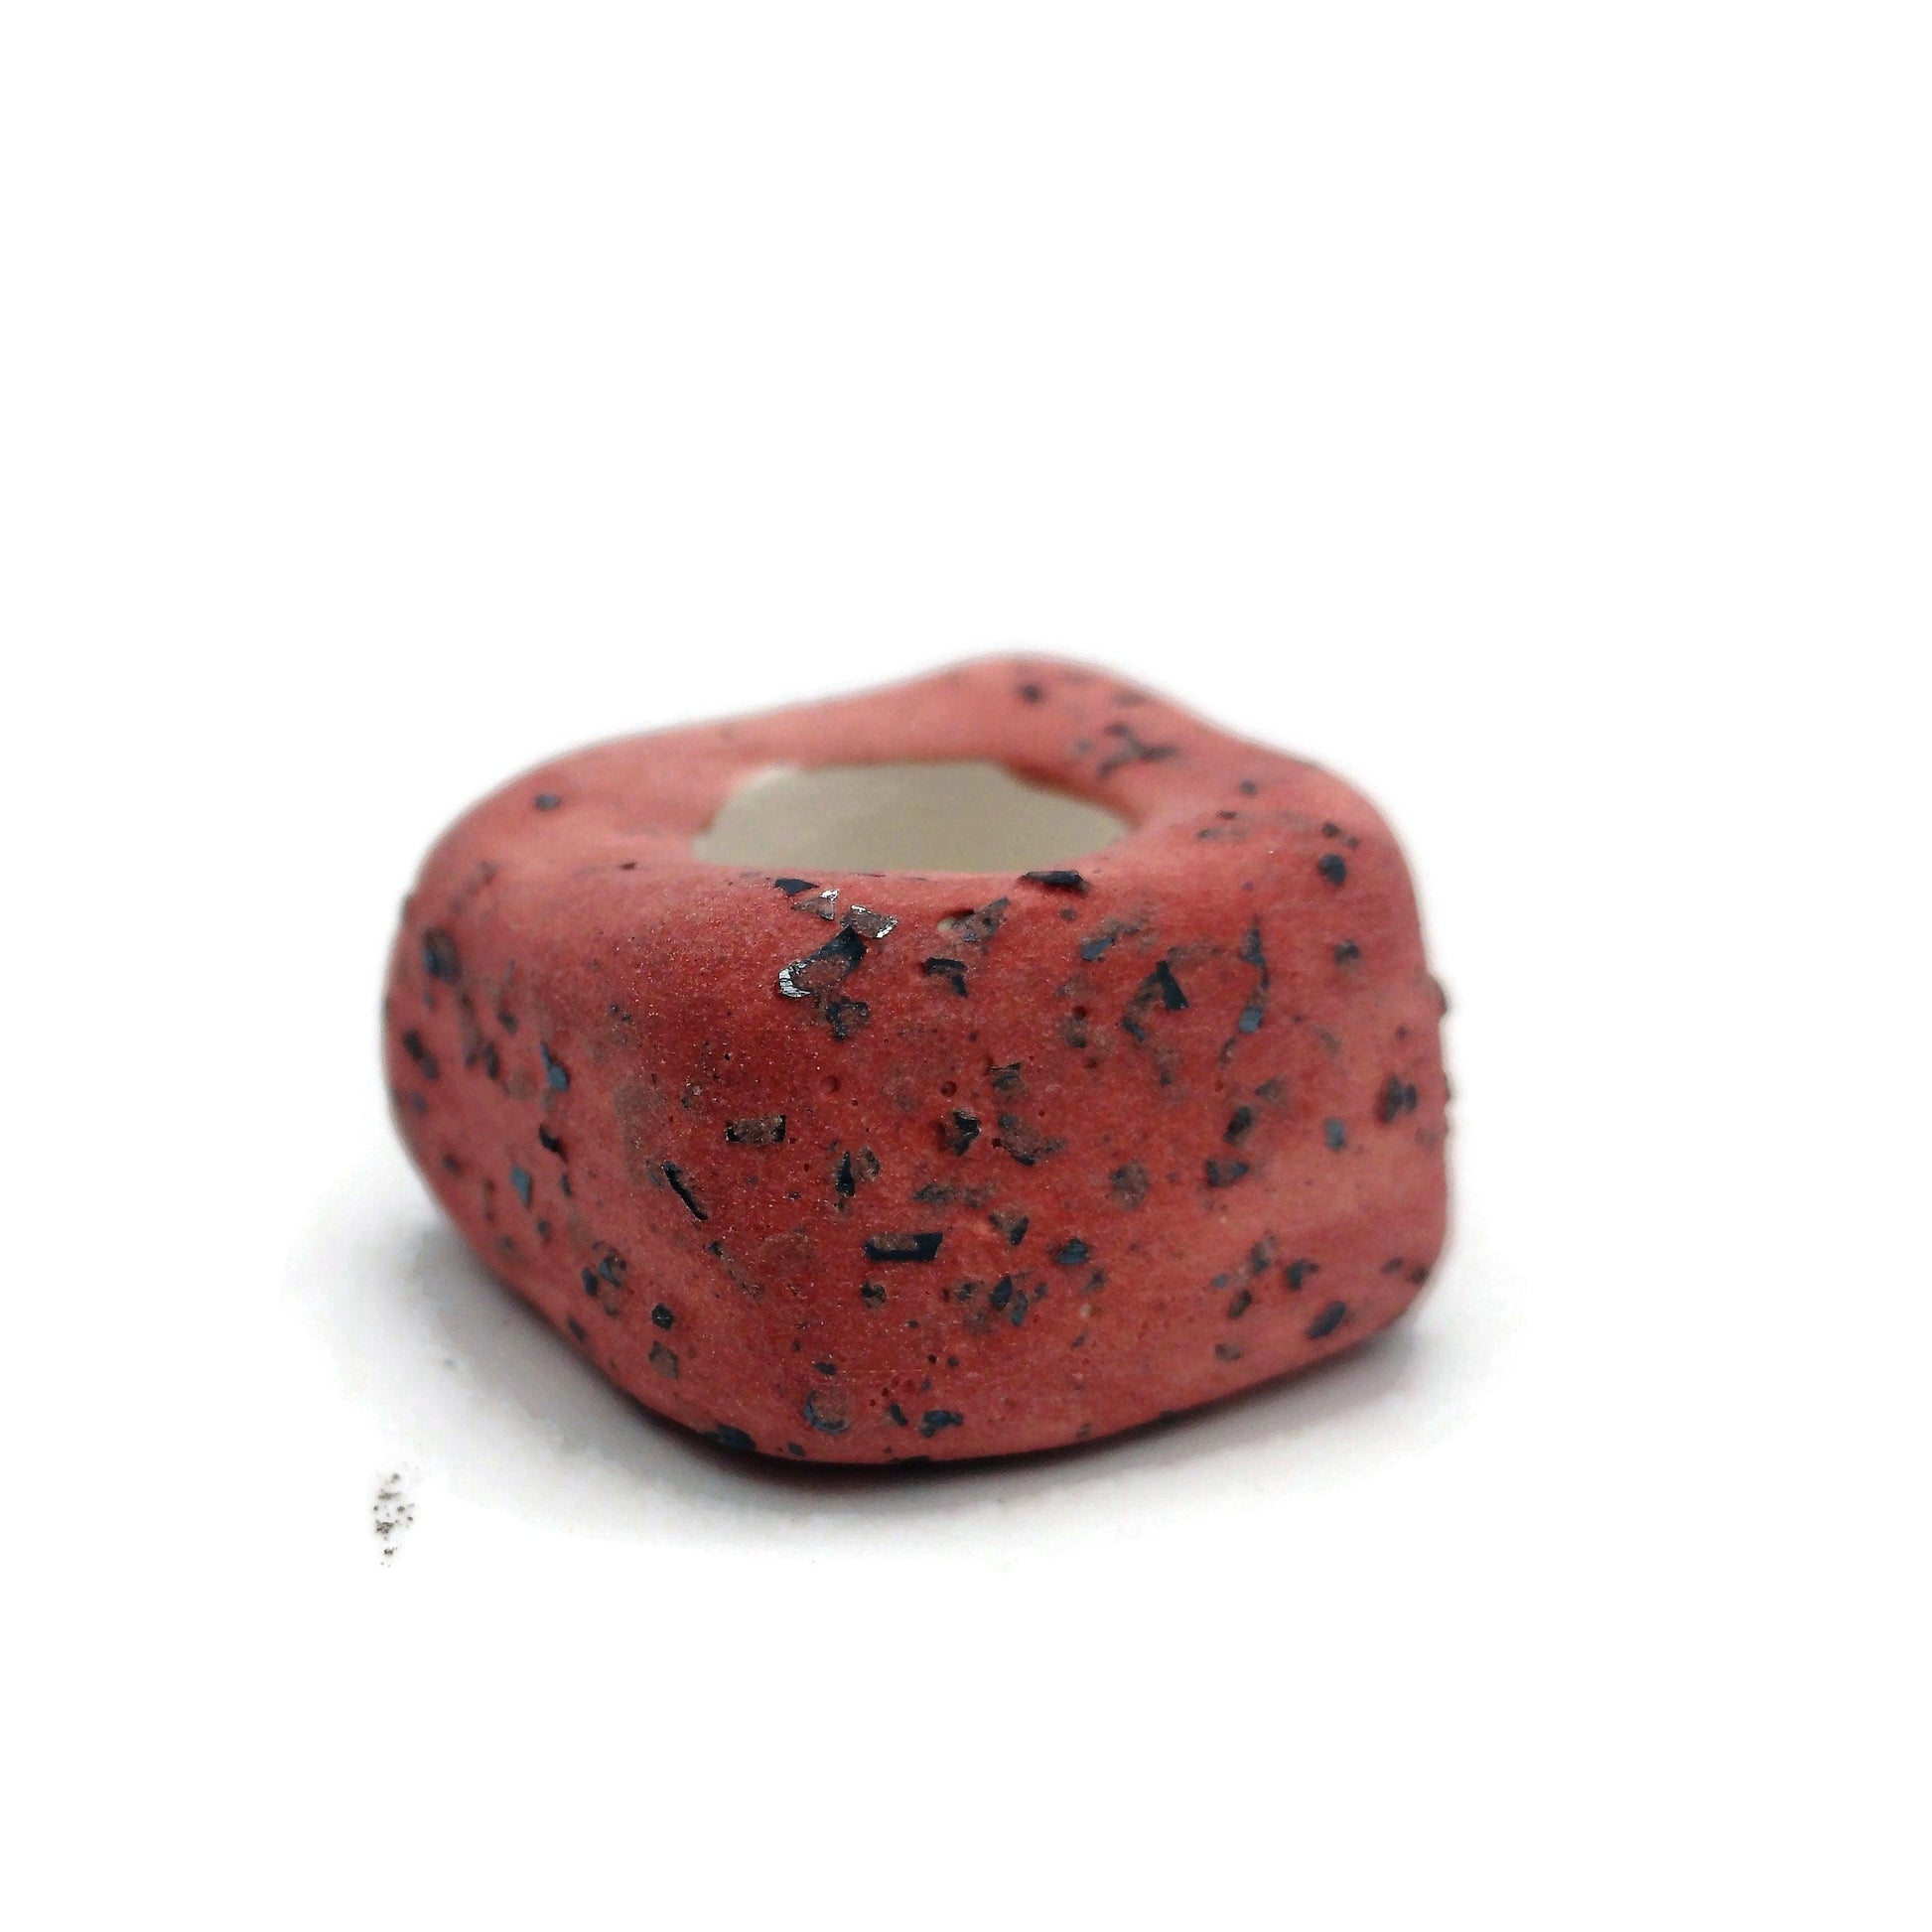 1Pc 25mm Extra Large Handmade Ceramic Beads For Macrame With Large Hole, Square Unique Chunky Clay Beads for Jewelry Making Sparkly Red Bead - Ceramica Ana Rafael